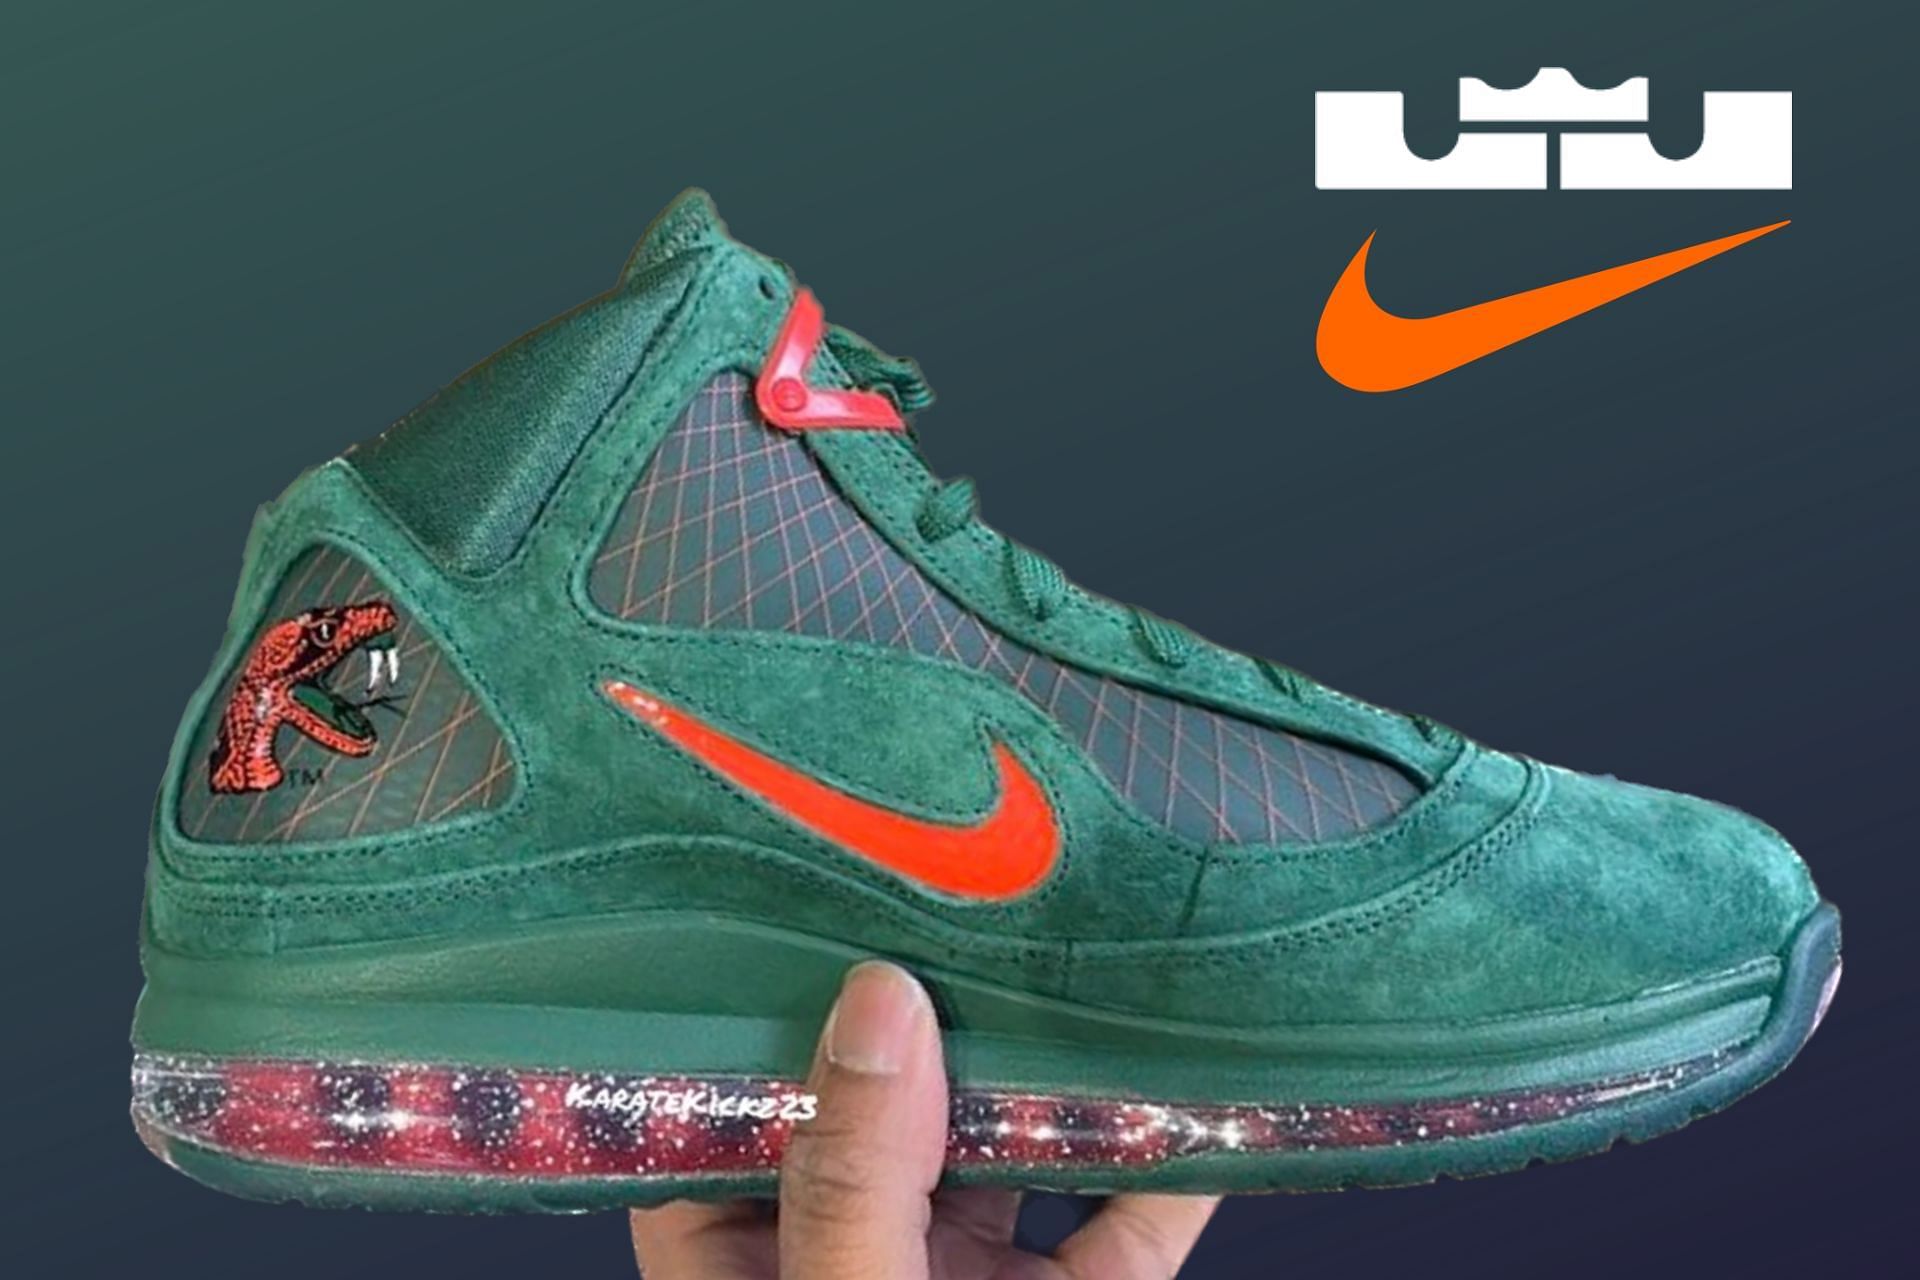 FAMU FAMU x Nike LeBron 7 Green shoes Where to buy, price, and more